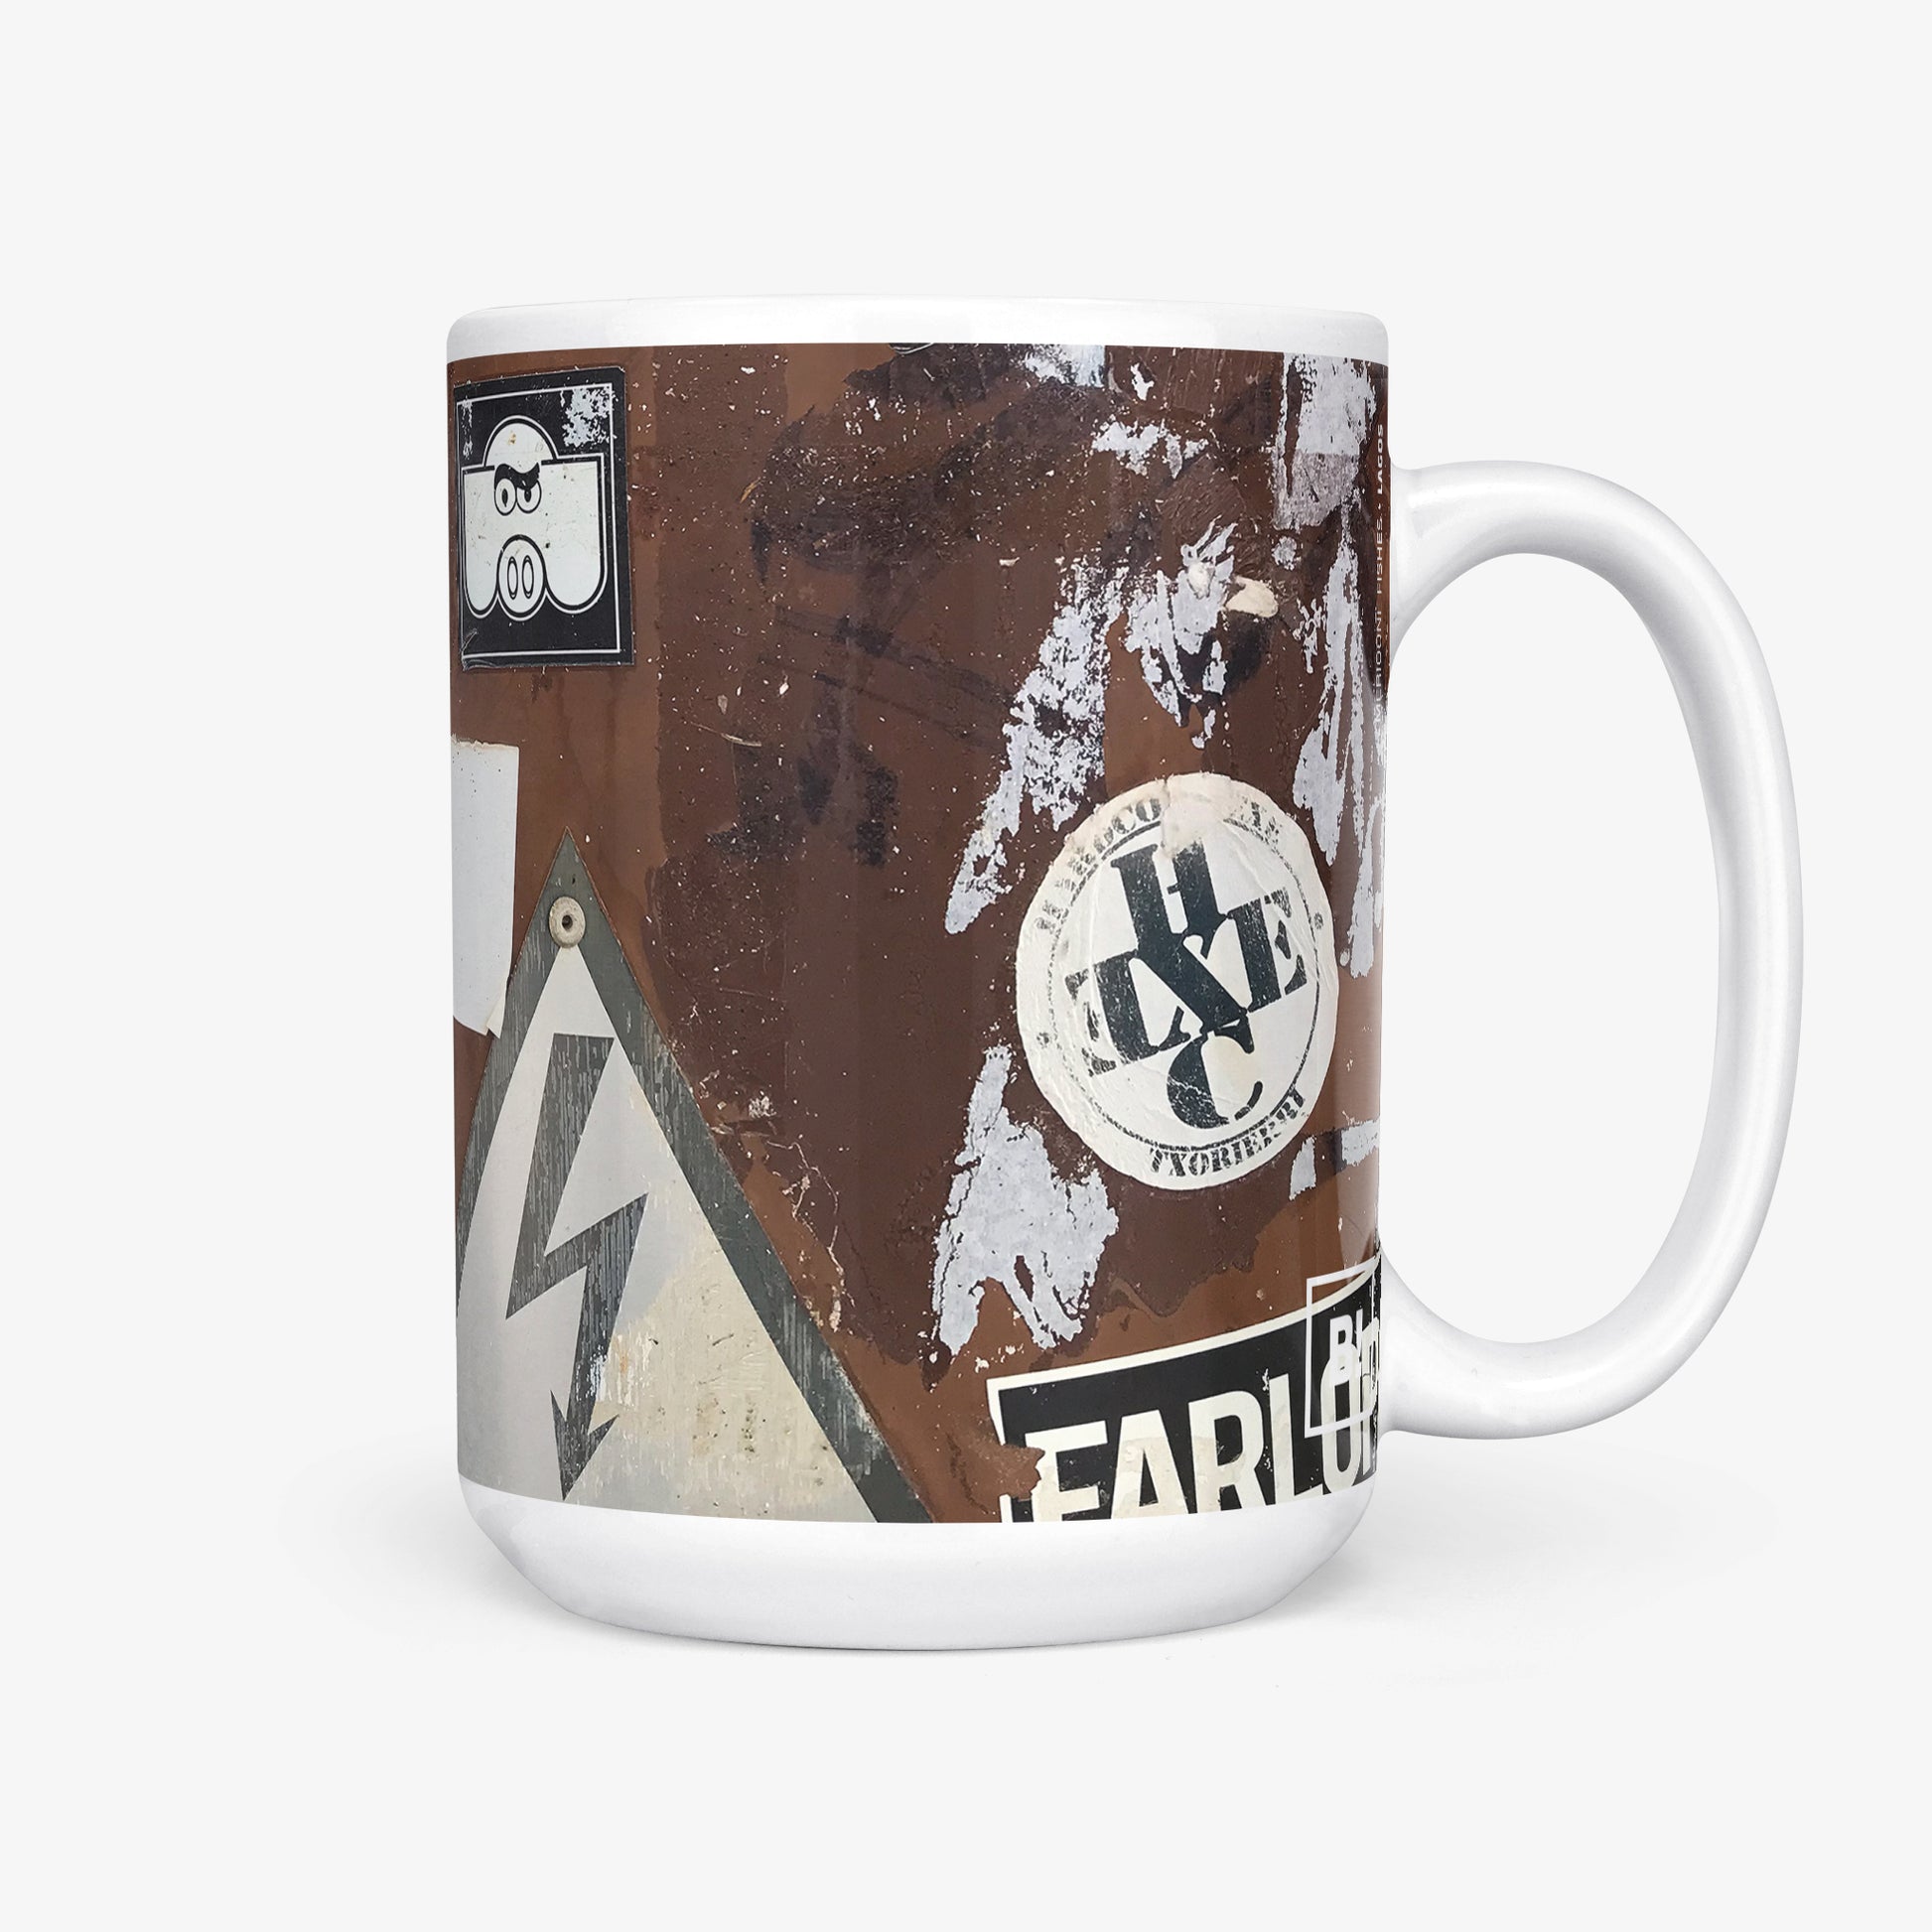 Be inspired by our Urban Art Coffee Mug – Merioone Fishes from Lagos. The mug has a capacity of 15 oz and the handle on the right side. The design of the mug captures the essence of the street and gives the mug an authentic urban feel, making it resemble a piece of street art itself.